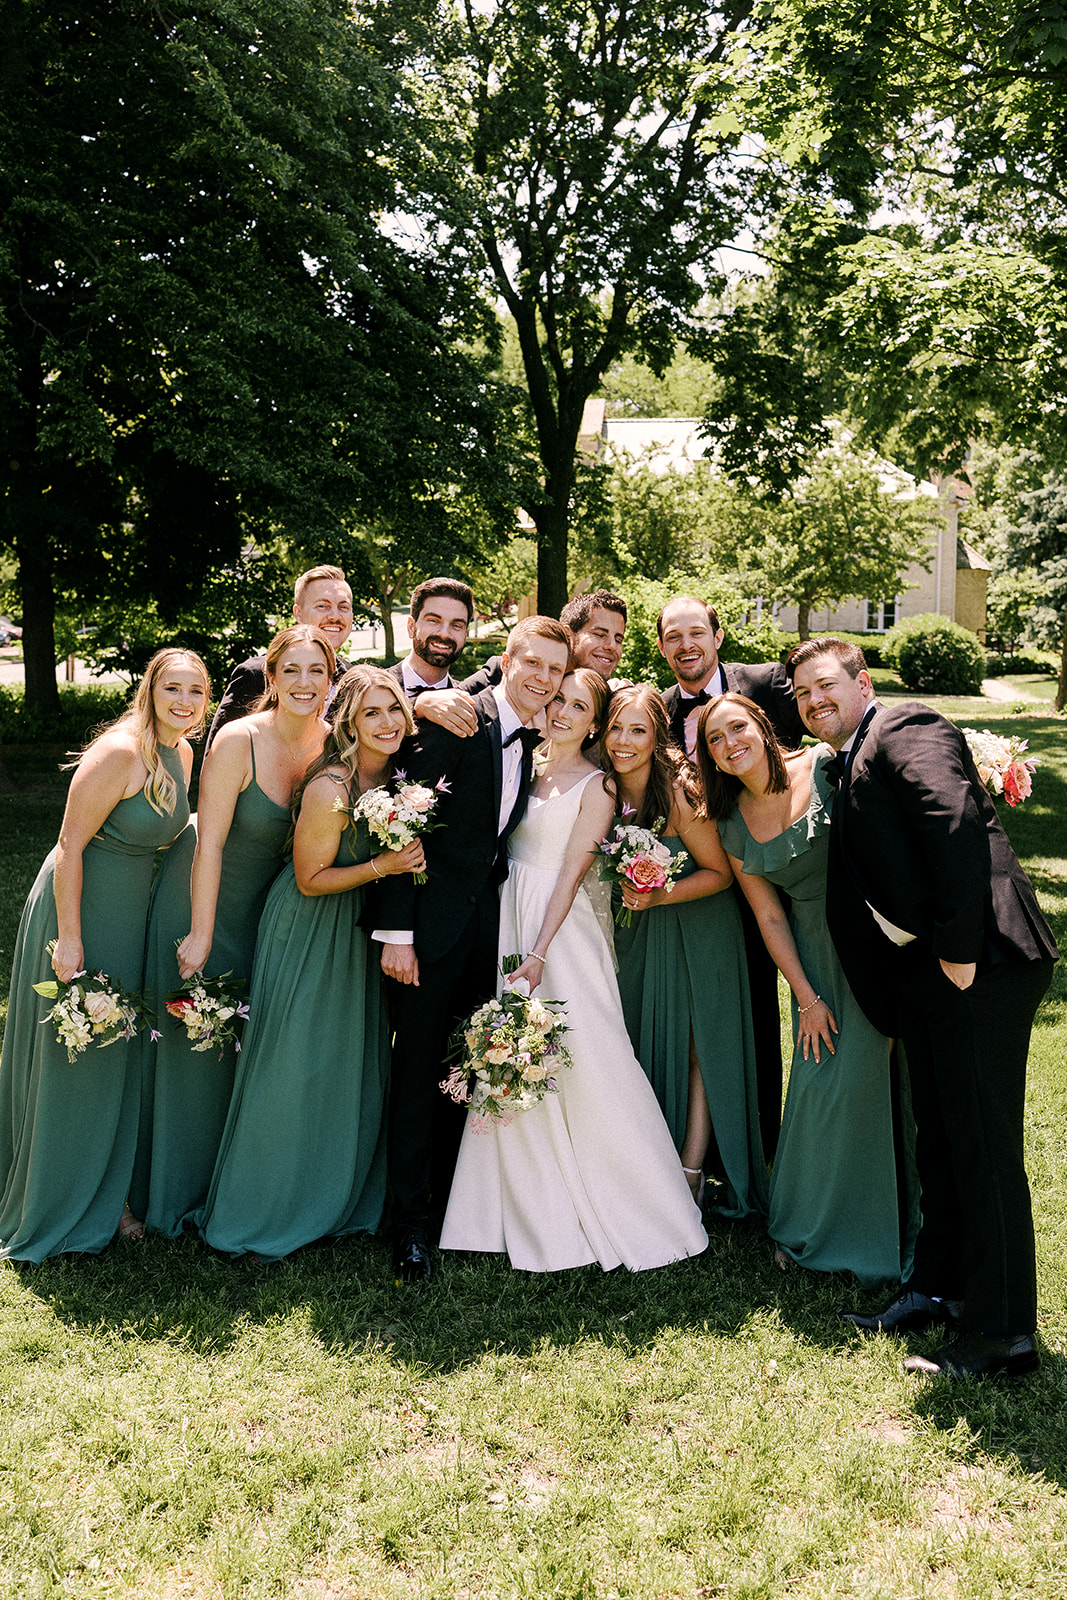 bride and groom pose for a group photo with their wedding party on their wedding day in madison wisconsin